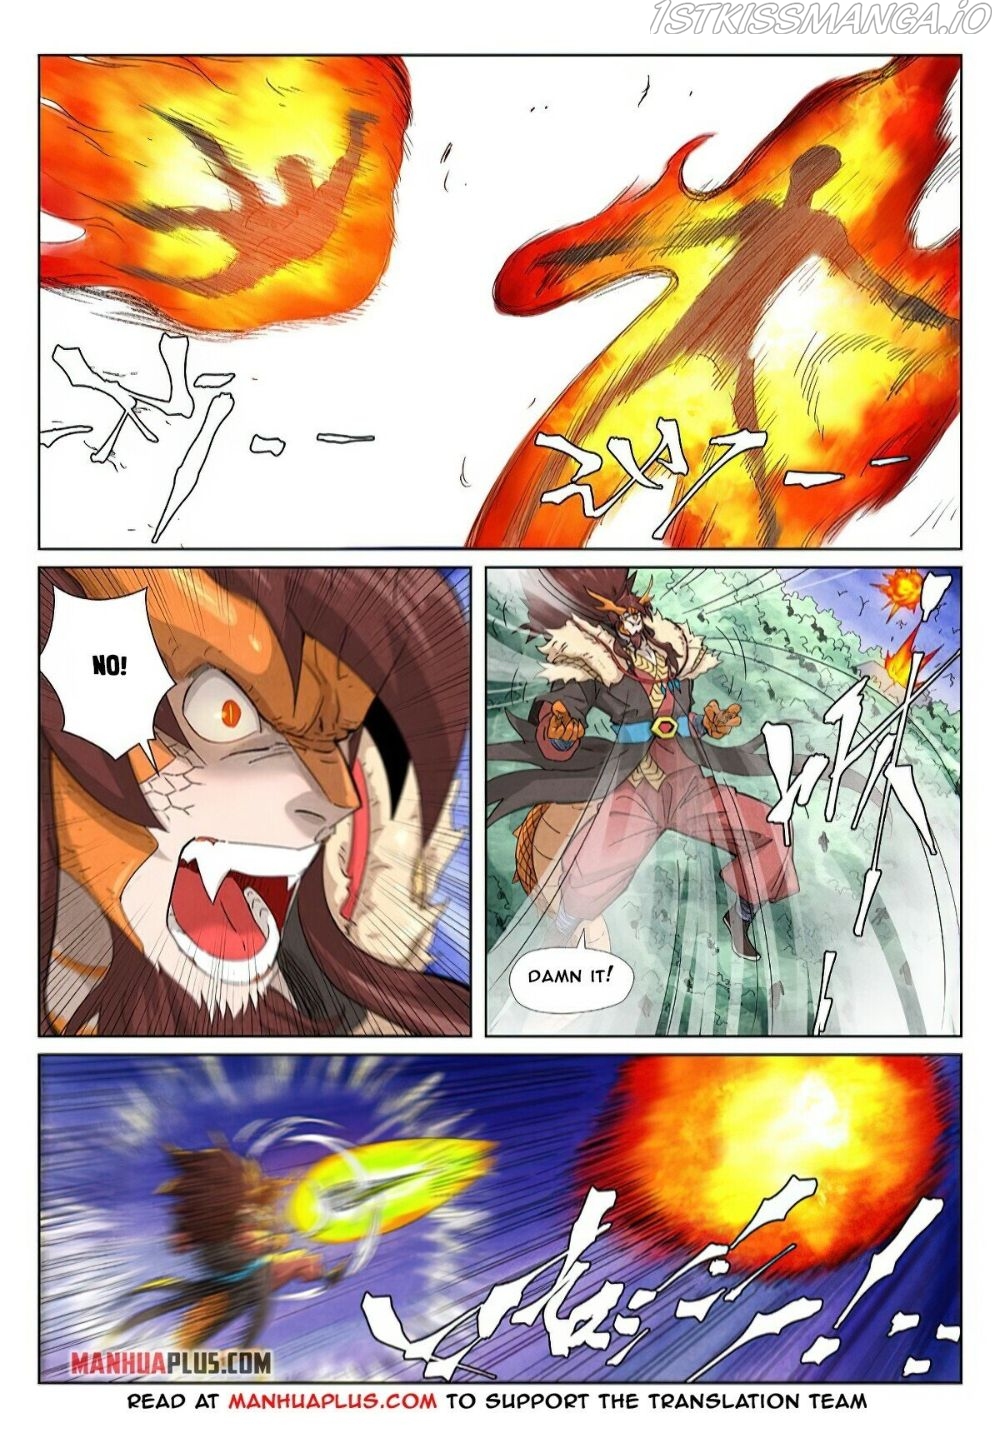 Tales of Demons and Gods Manhua Chapter 358.5 - Page 1